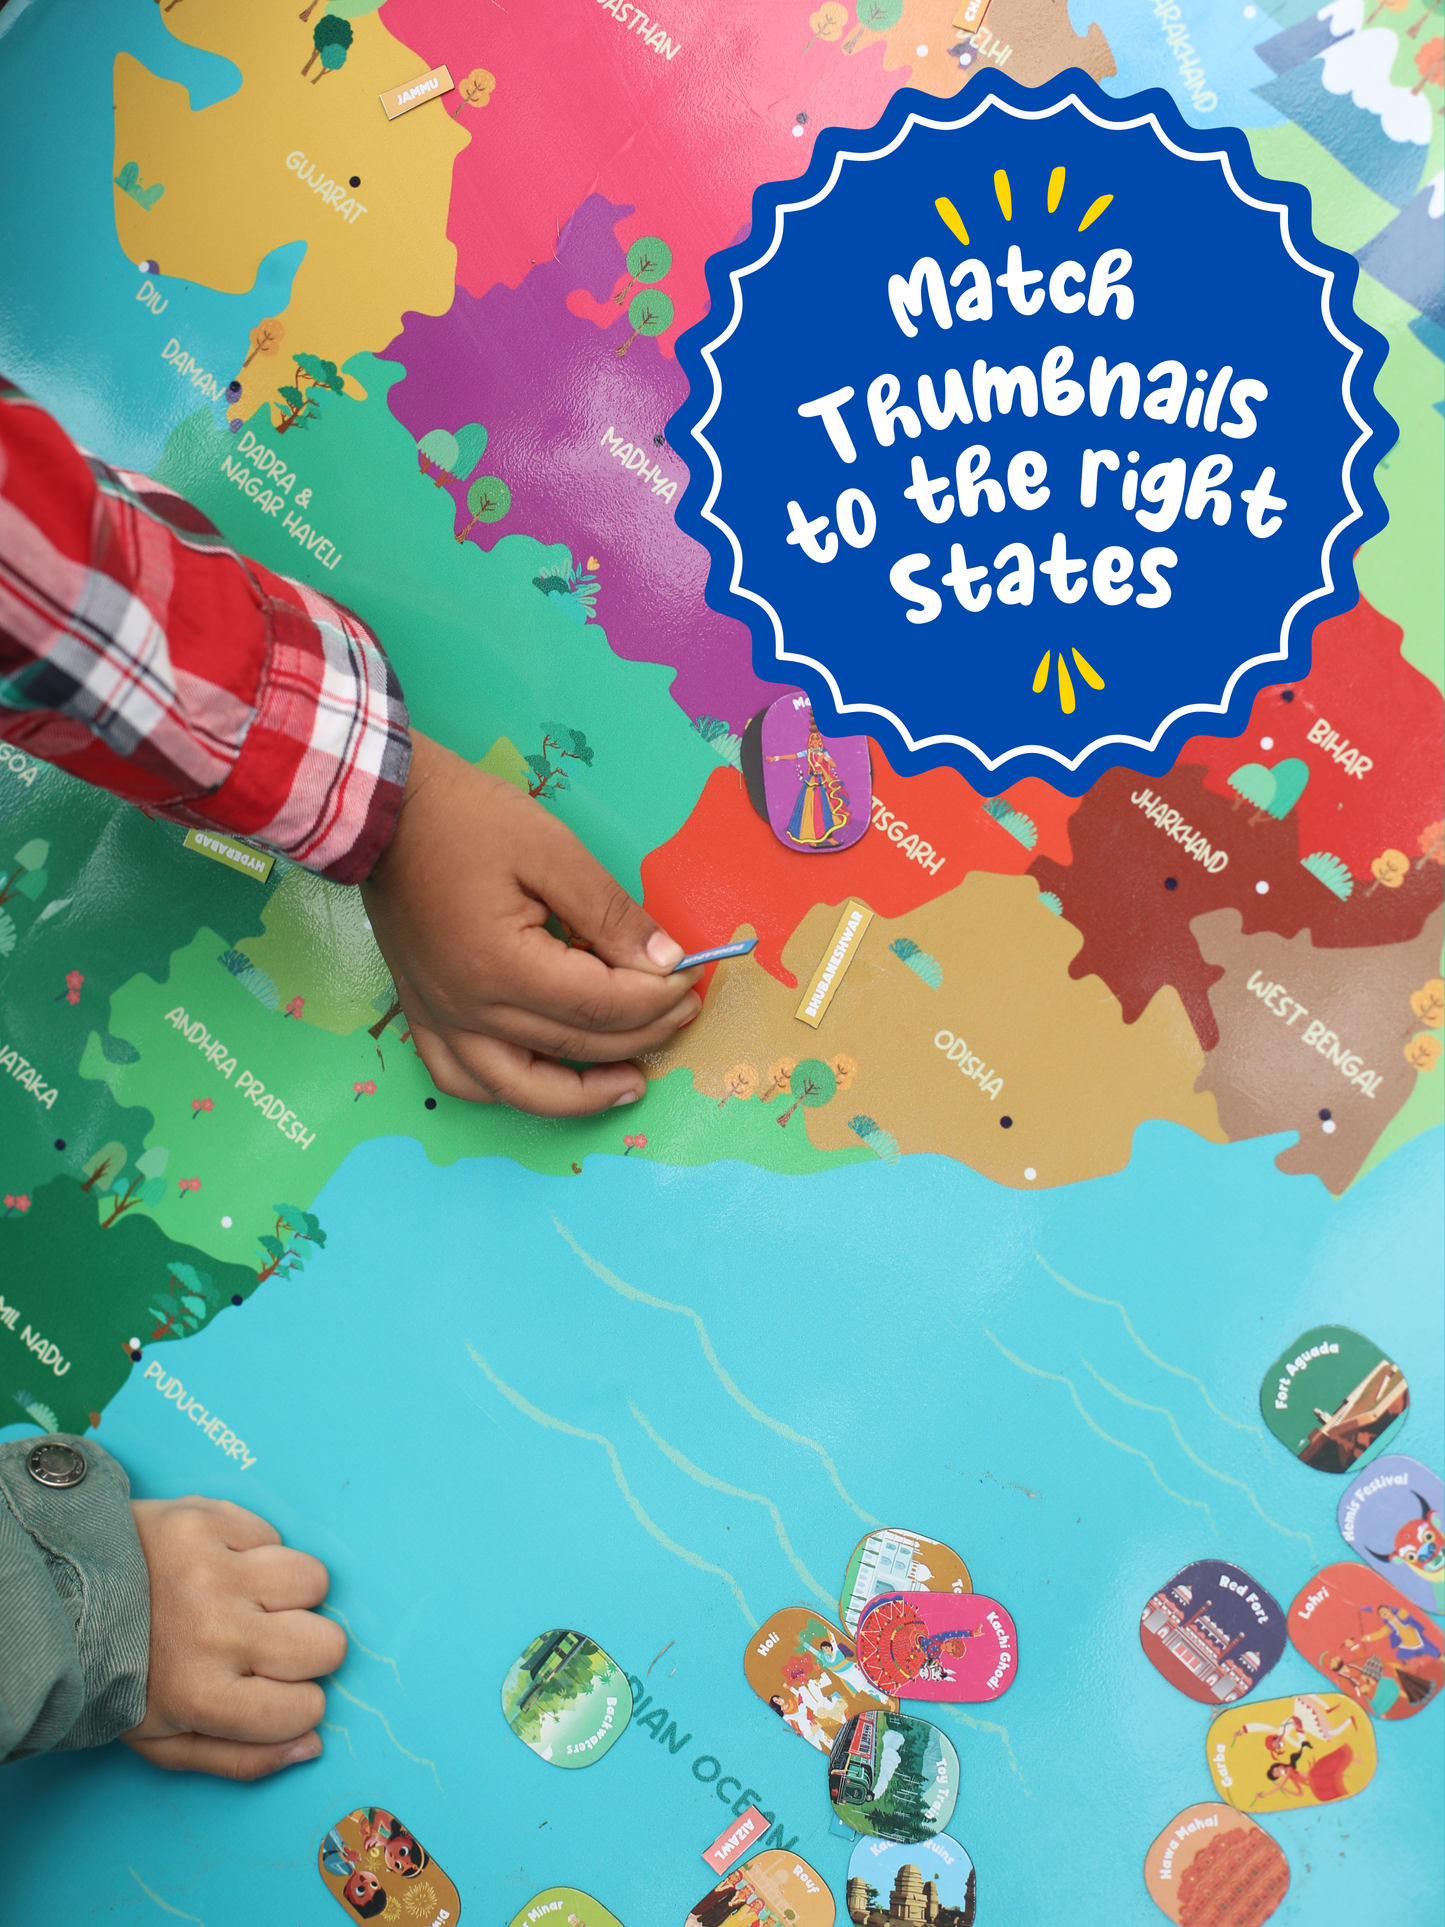 Toynama Interactive India Map for Kids - Wall Mountable Map with Capitals, Landmarks Dances and Festivals Magnetic Tiles Ages 5 and Up